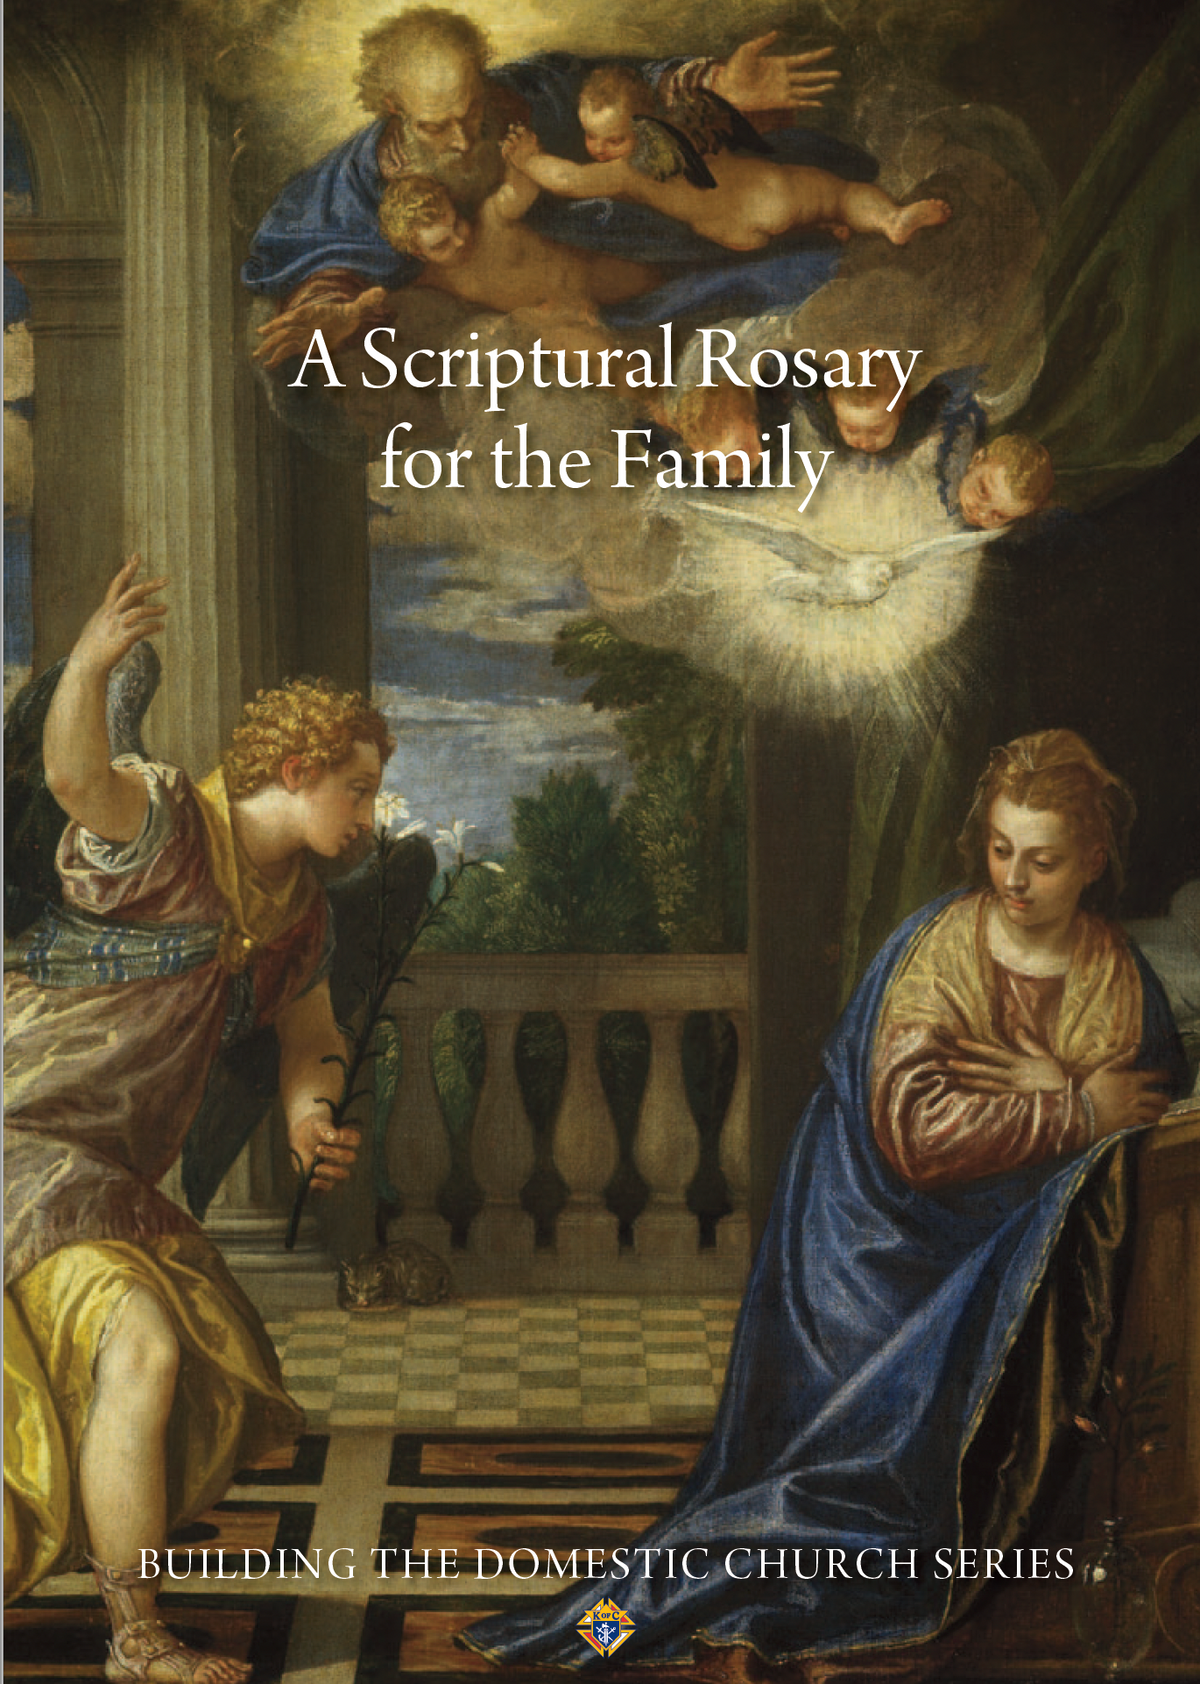 A Scriptural Rosary for the Family Booklet